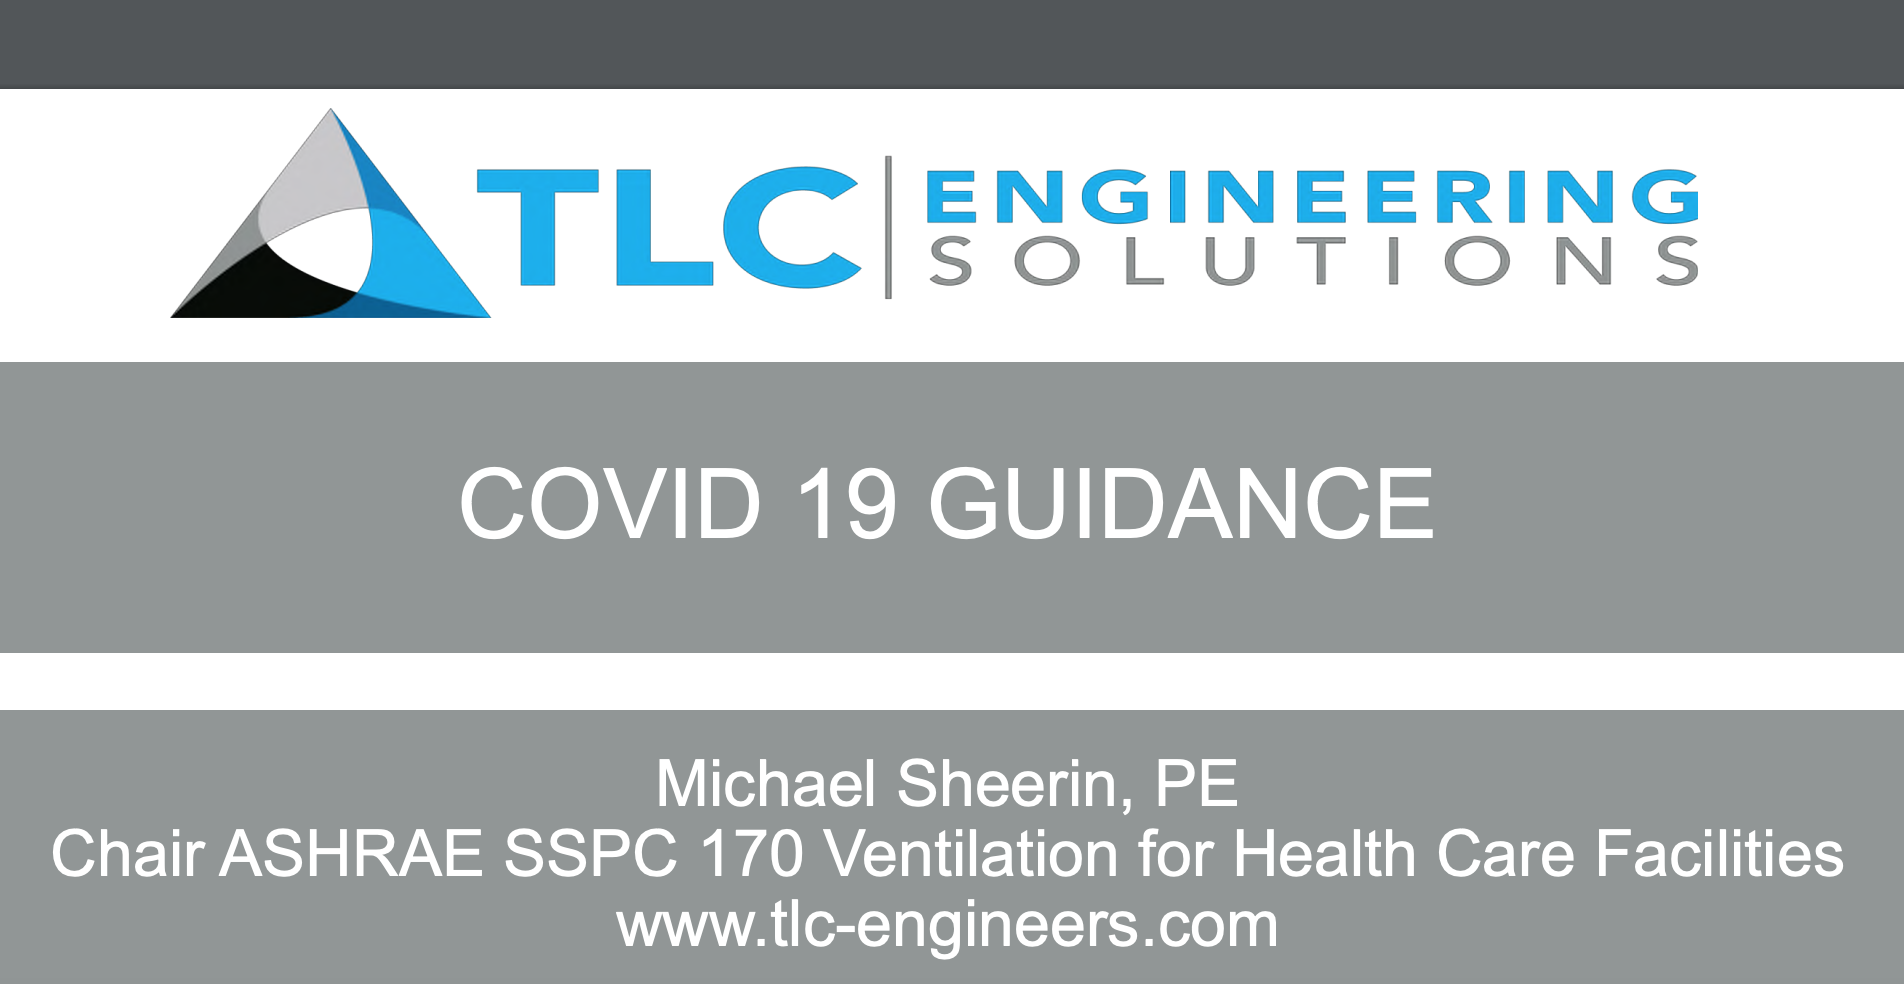 TLC Engineering Consultants' guidance on ventilation in COVID-19 patient rooms